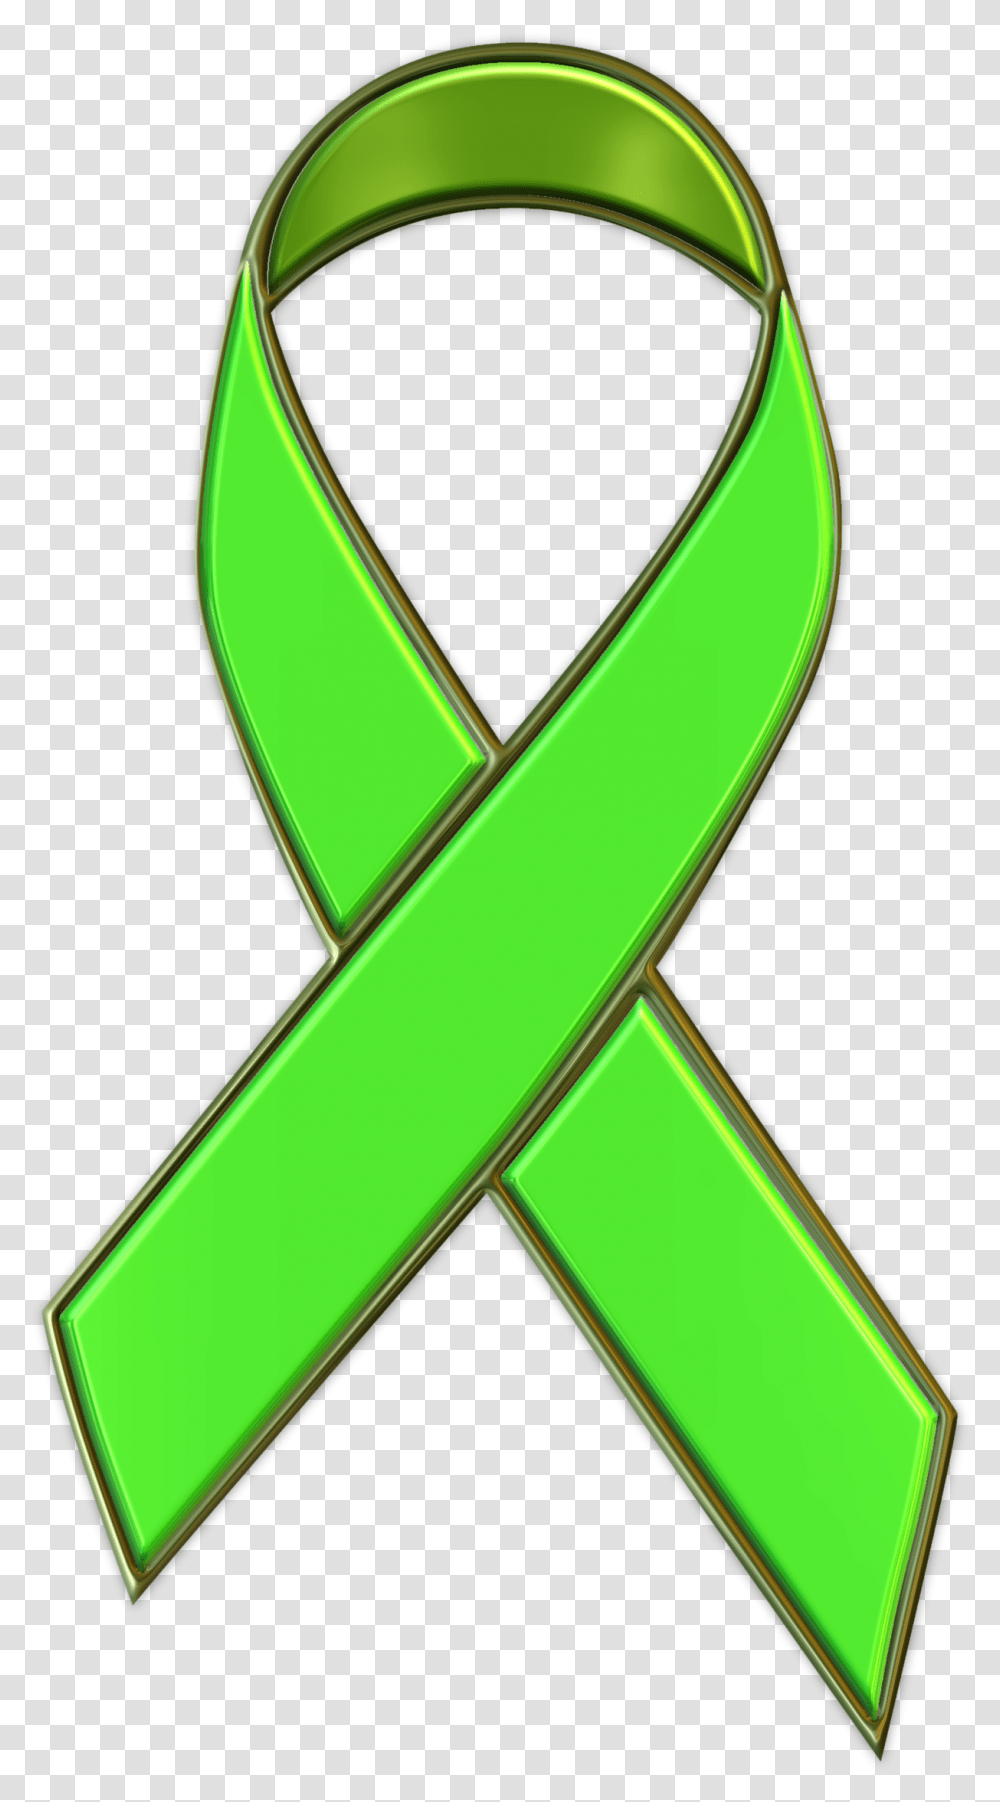 Clip Arts Related To Purple Ribbon No Background Green Mental Health Ribbon, Plant, Tree, Symbol, Graphics Transparent Png